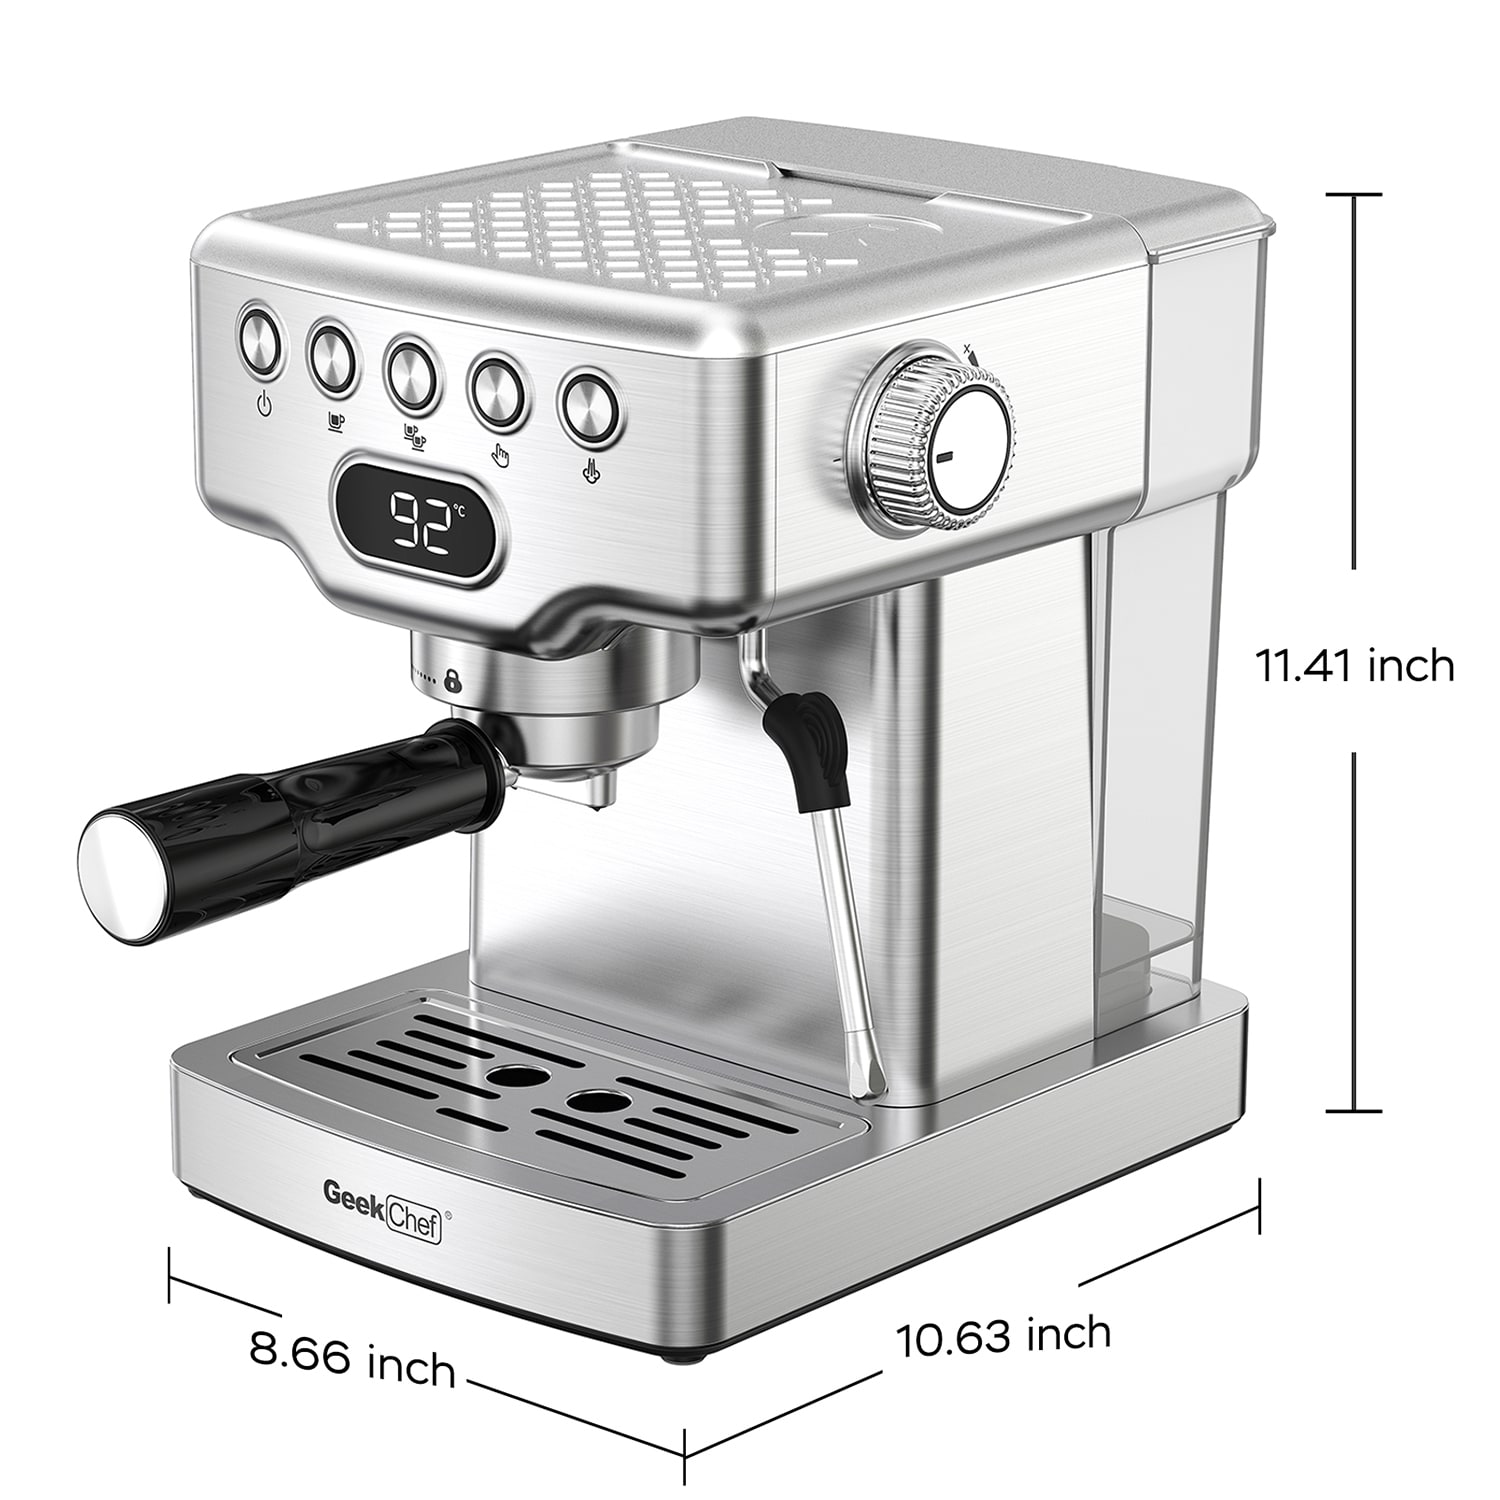 GZMR Stainless Steel Semi Automatic Espresso Machine in the 